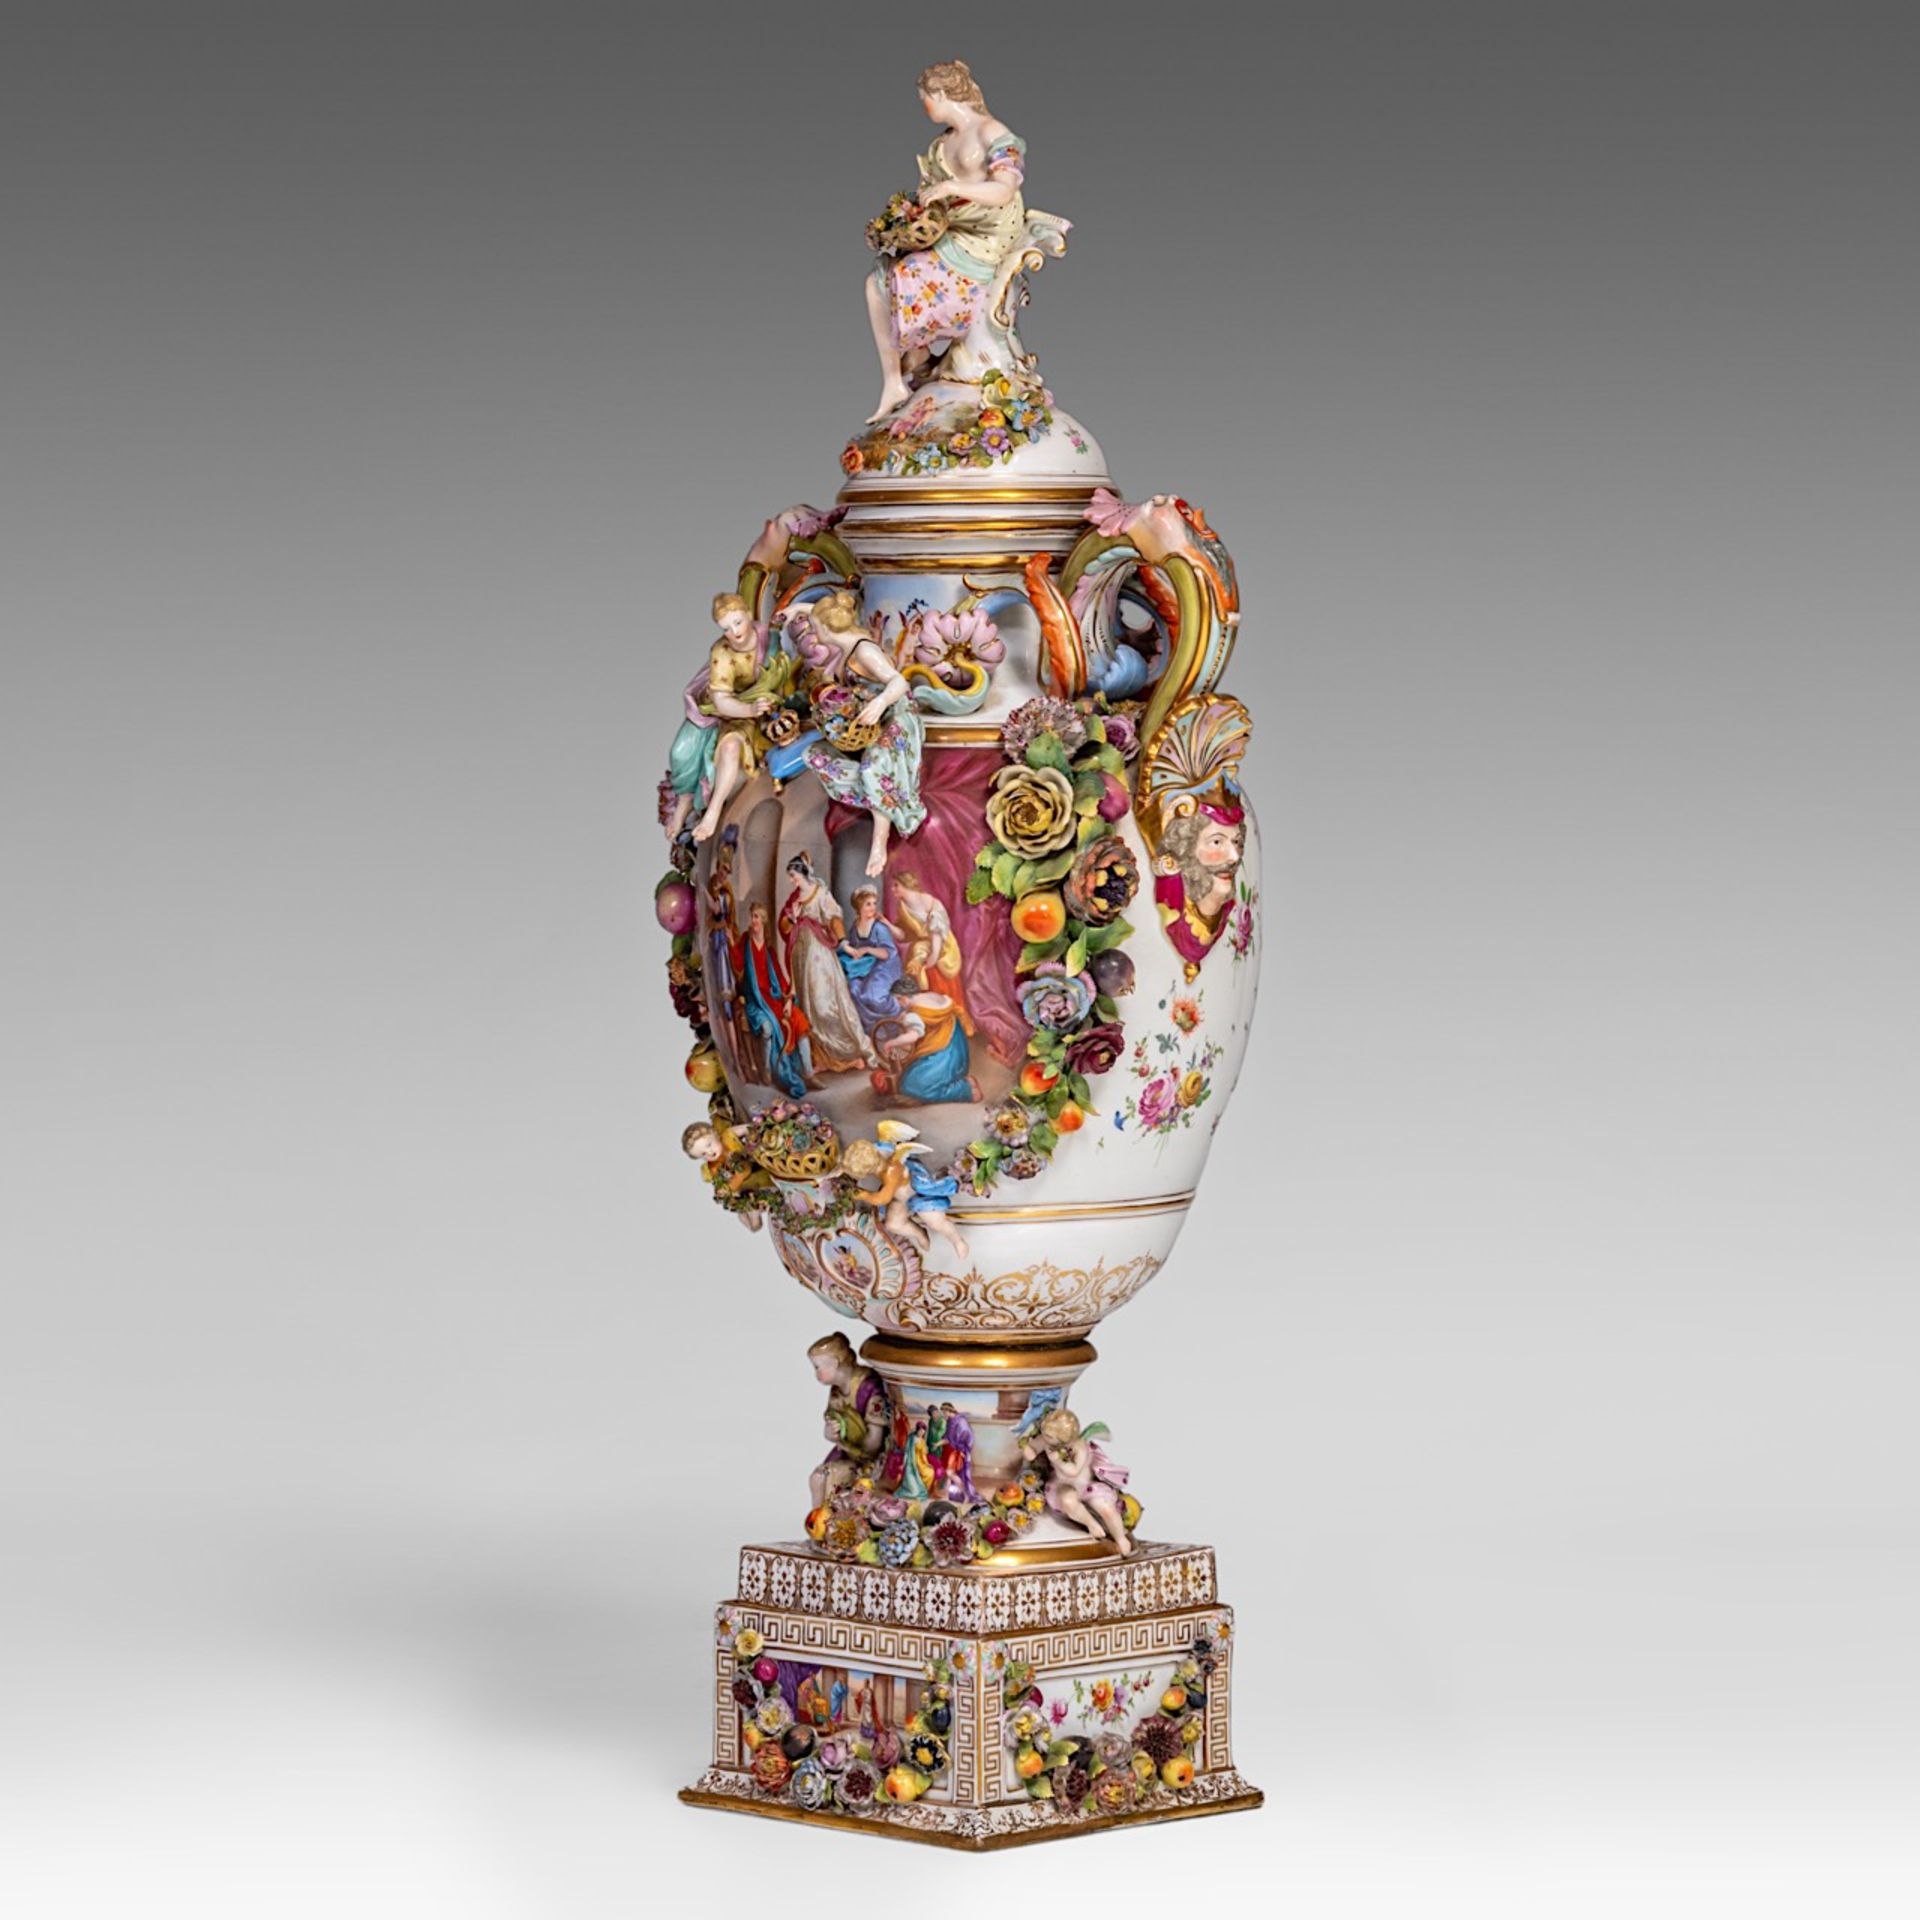 A very imposing Saxony porcelain vase on stand, Postschappel manufactory, Dresden, H 107 cm (total) - Image 2 of 23